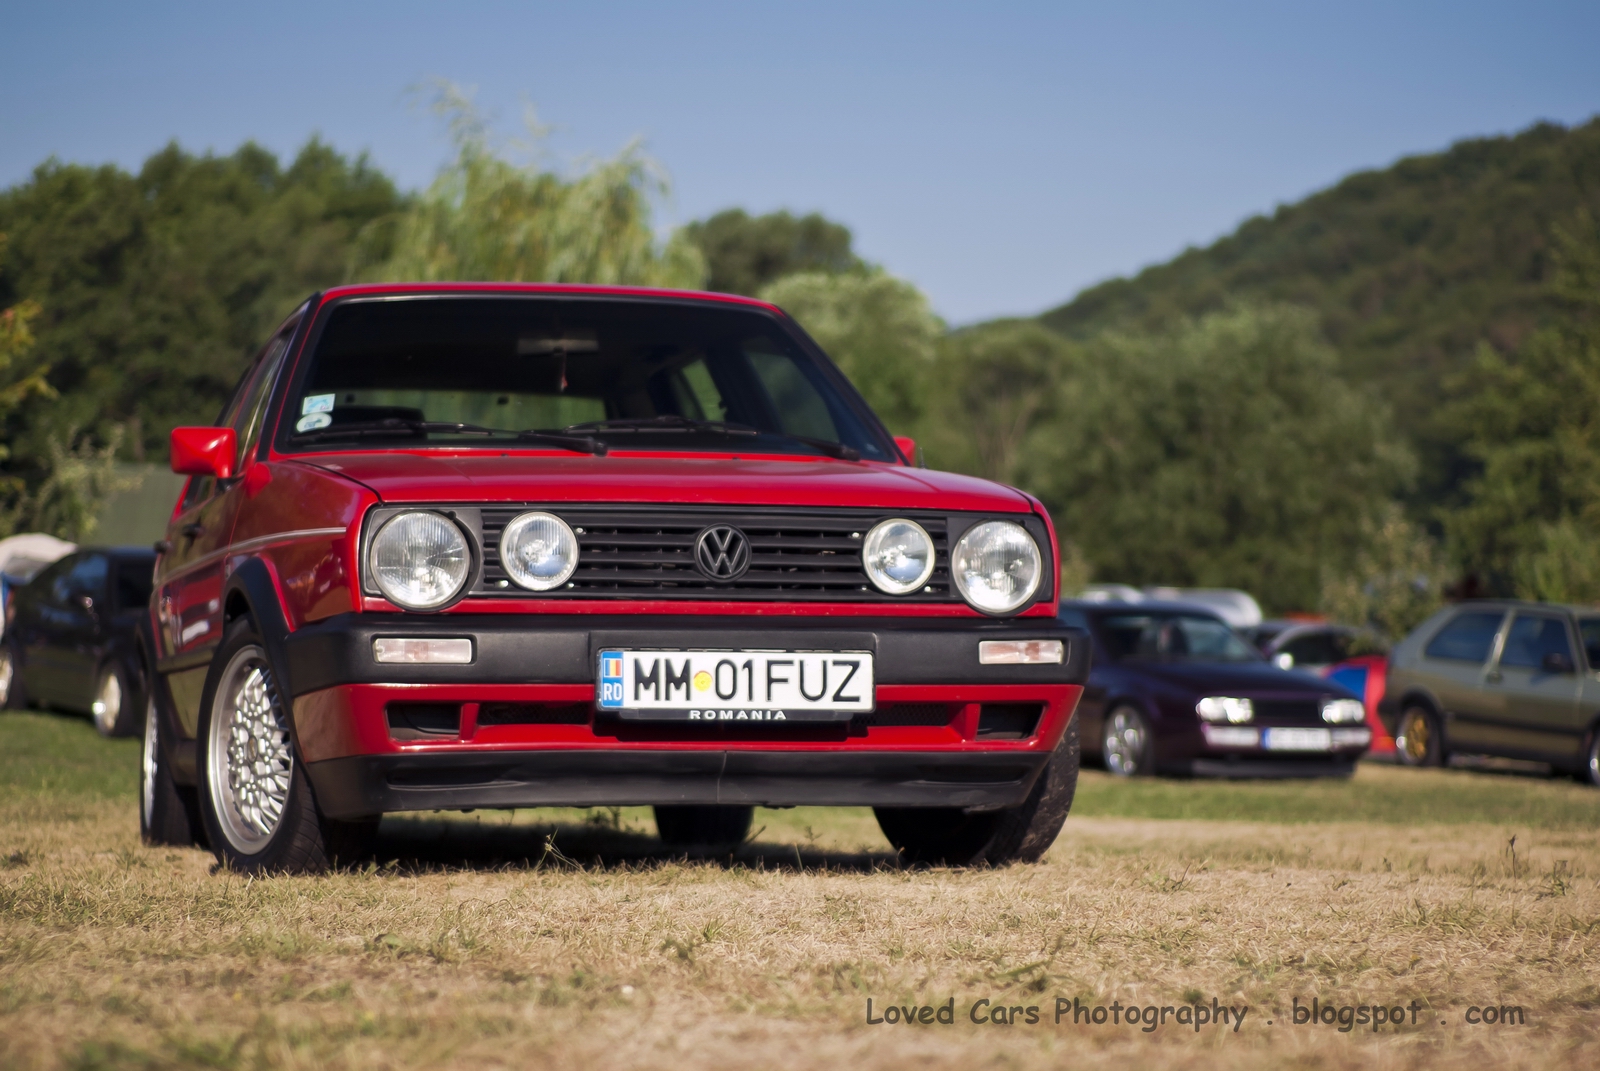 LOVED CARS PHOTOGRAPHY: National meeting VW mk1 & mk2 (6th edition)